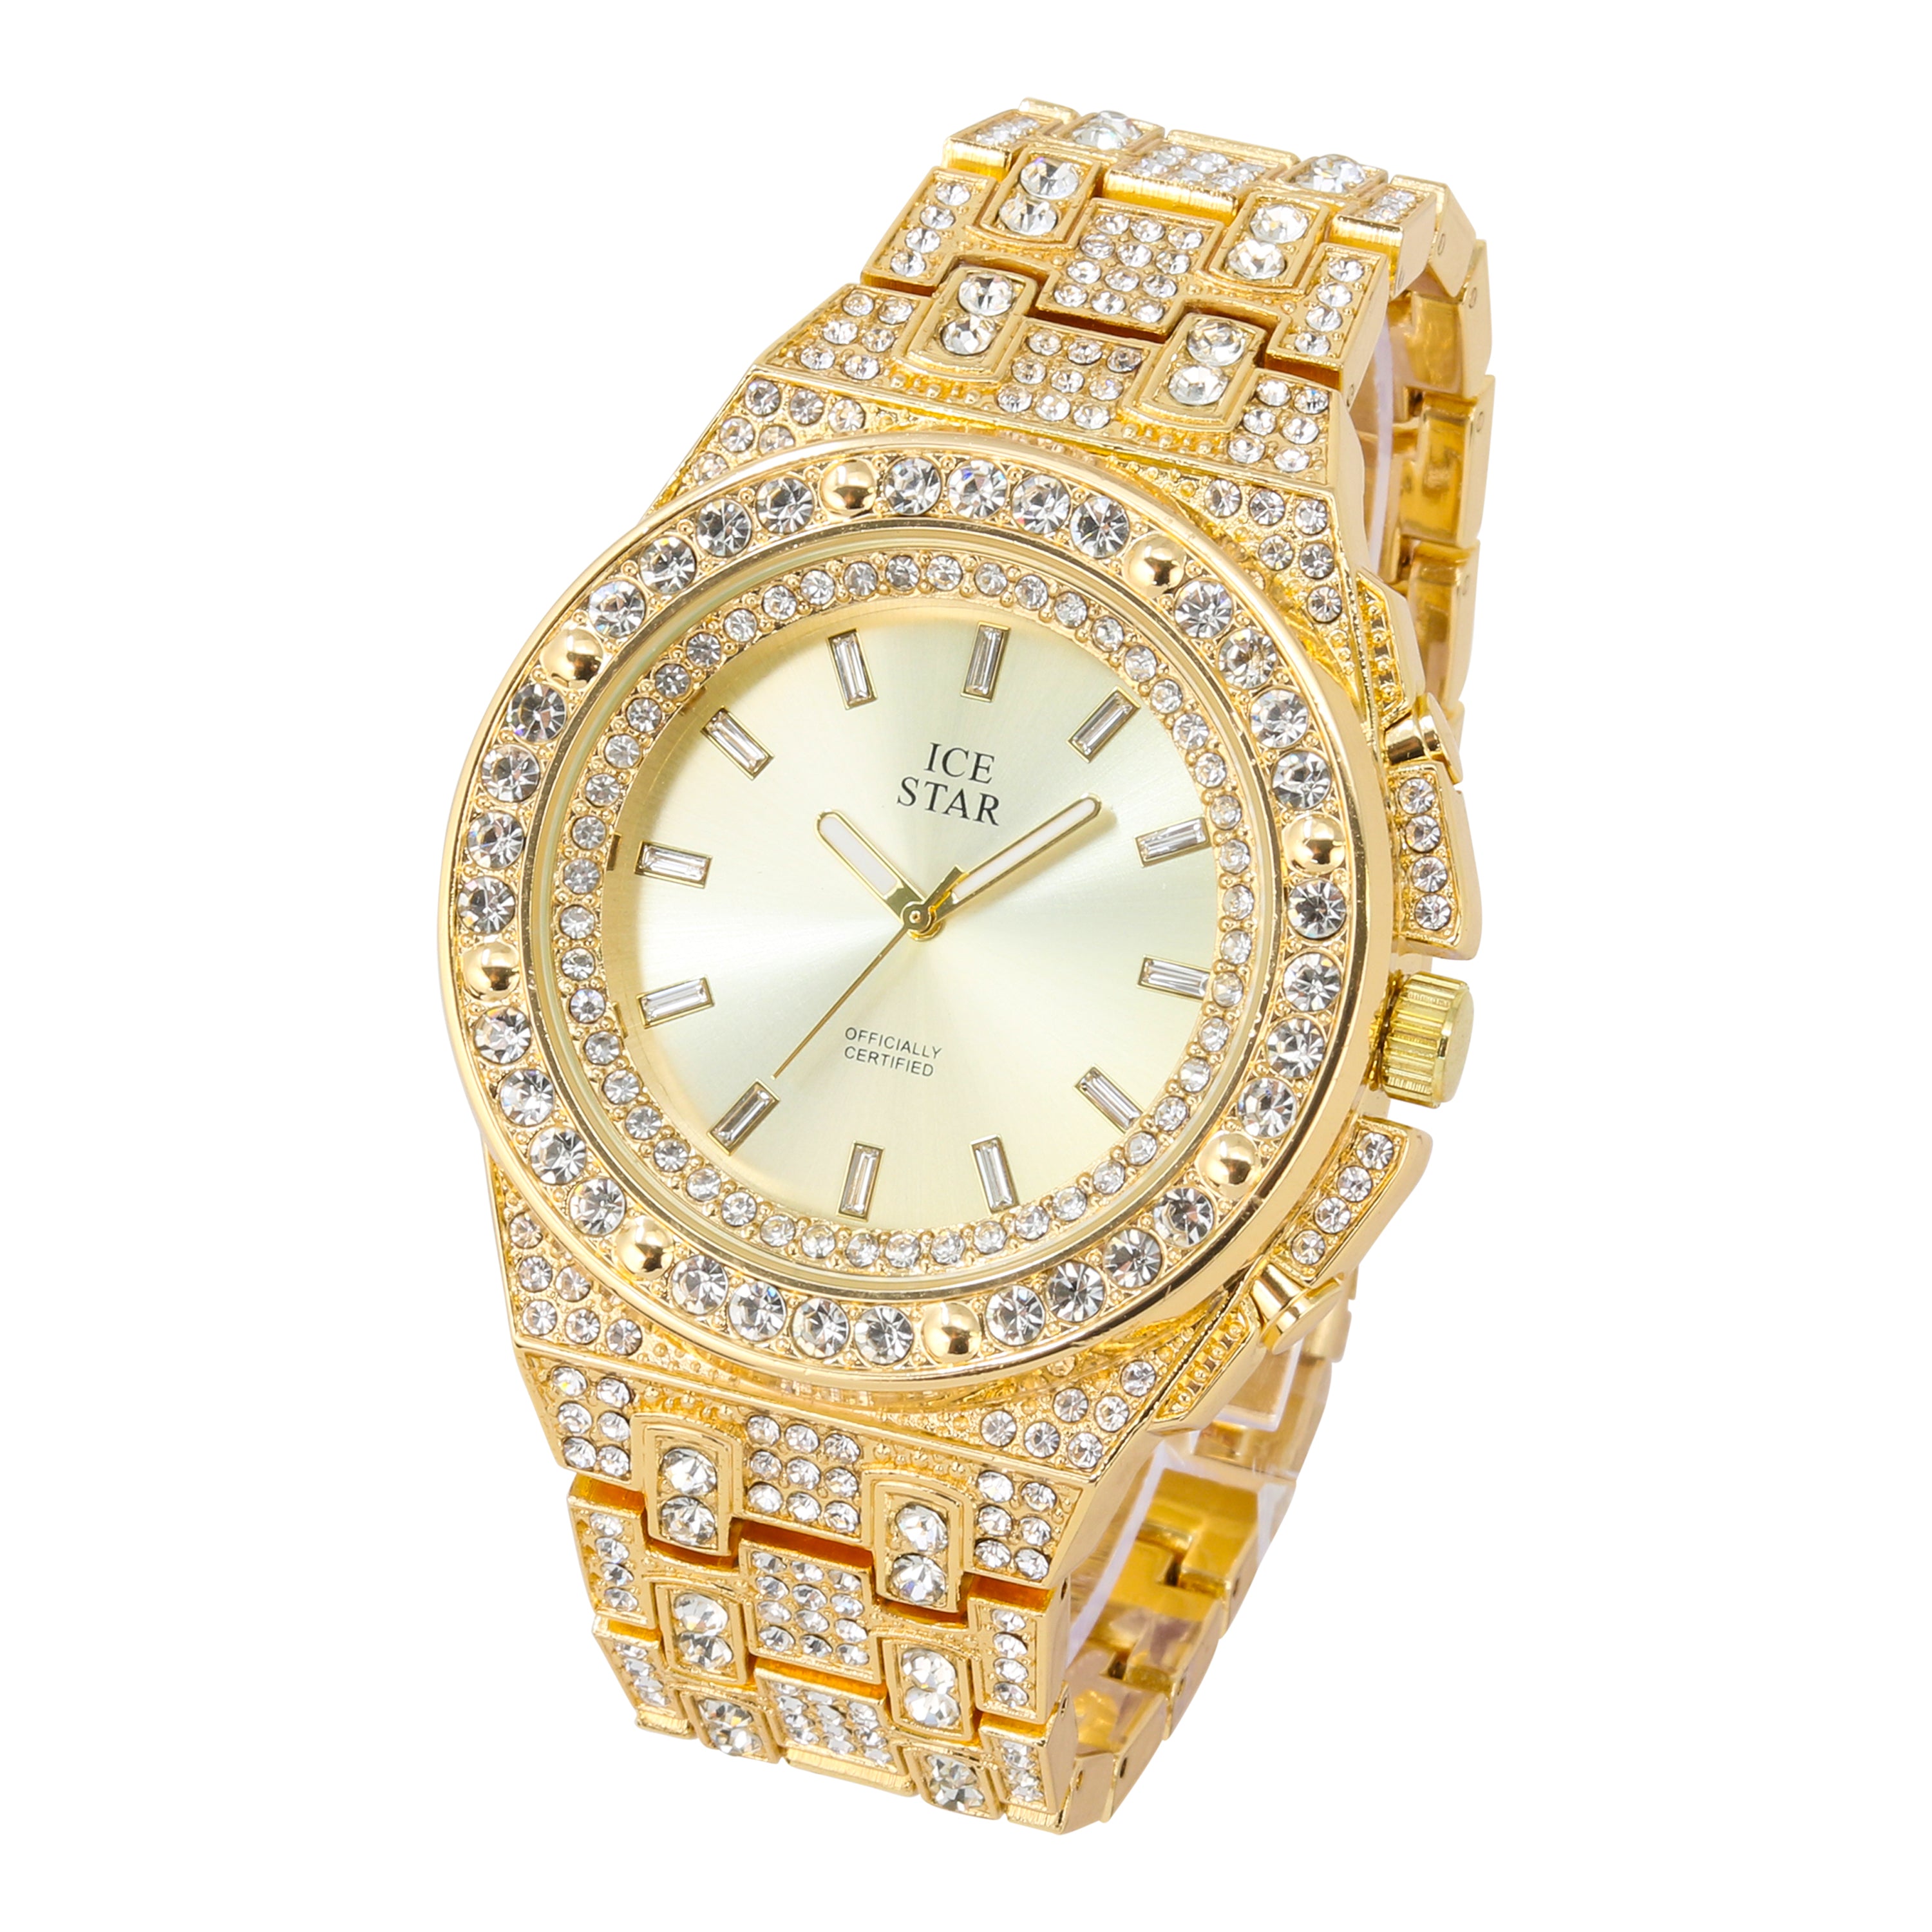 Men's Round Iced Out Watch 45mm Gold - Baguette Dial